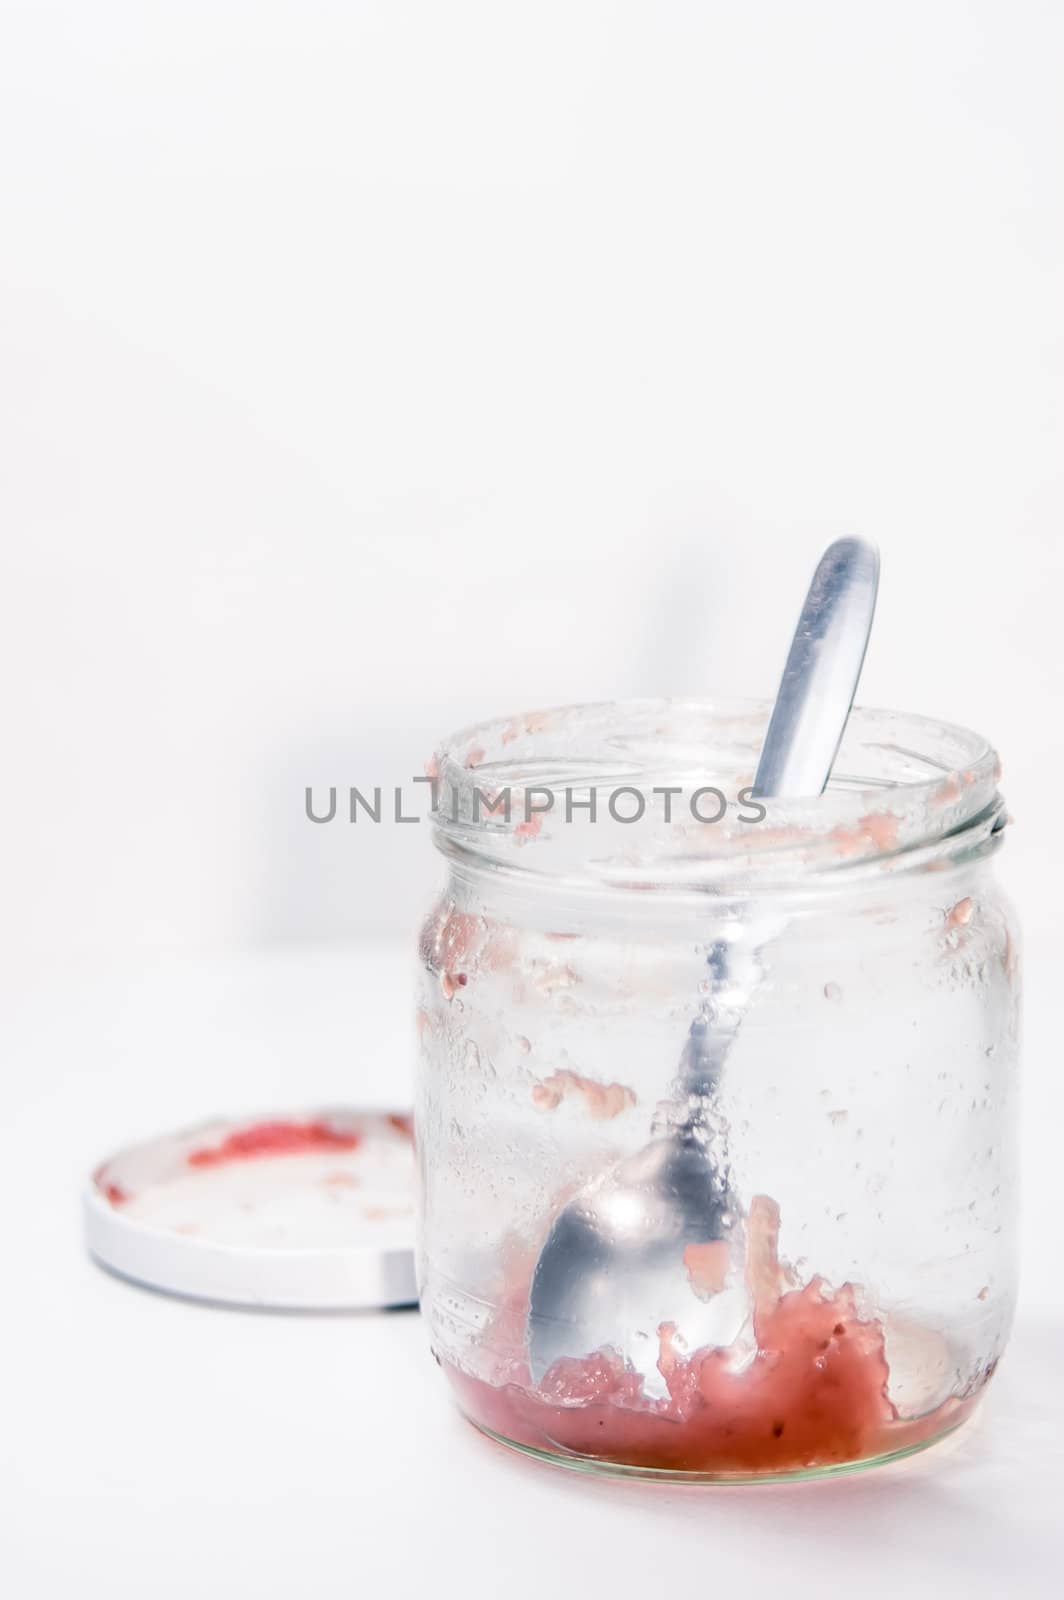 Empty marmalade jar and spoon by saap585